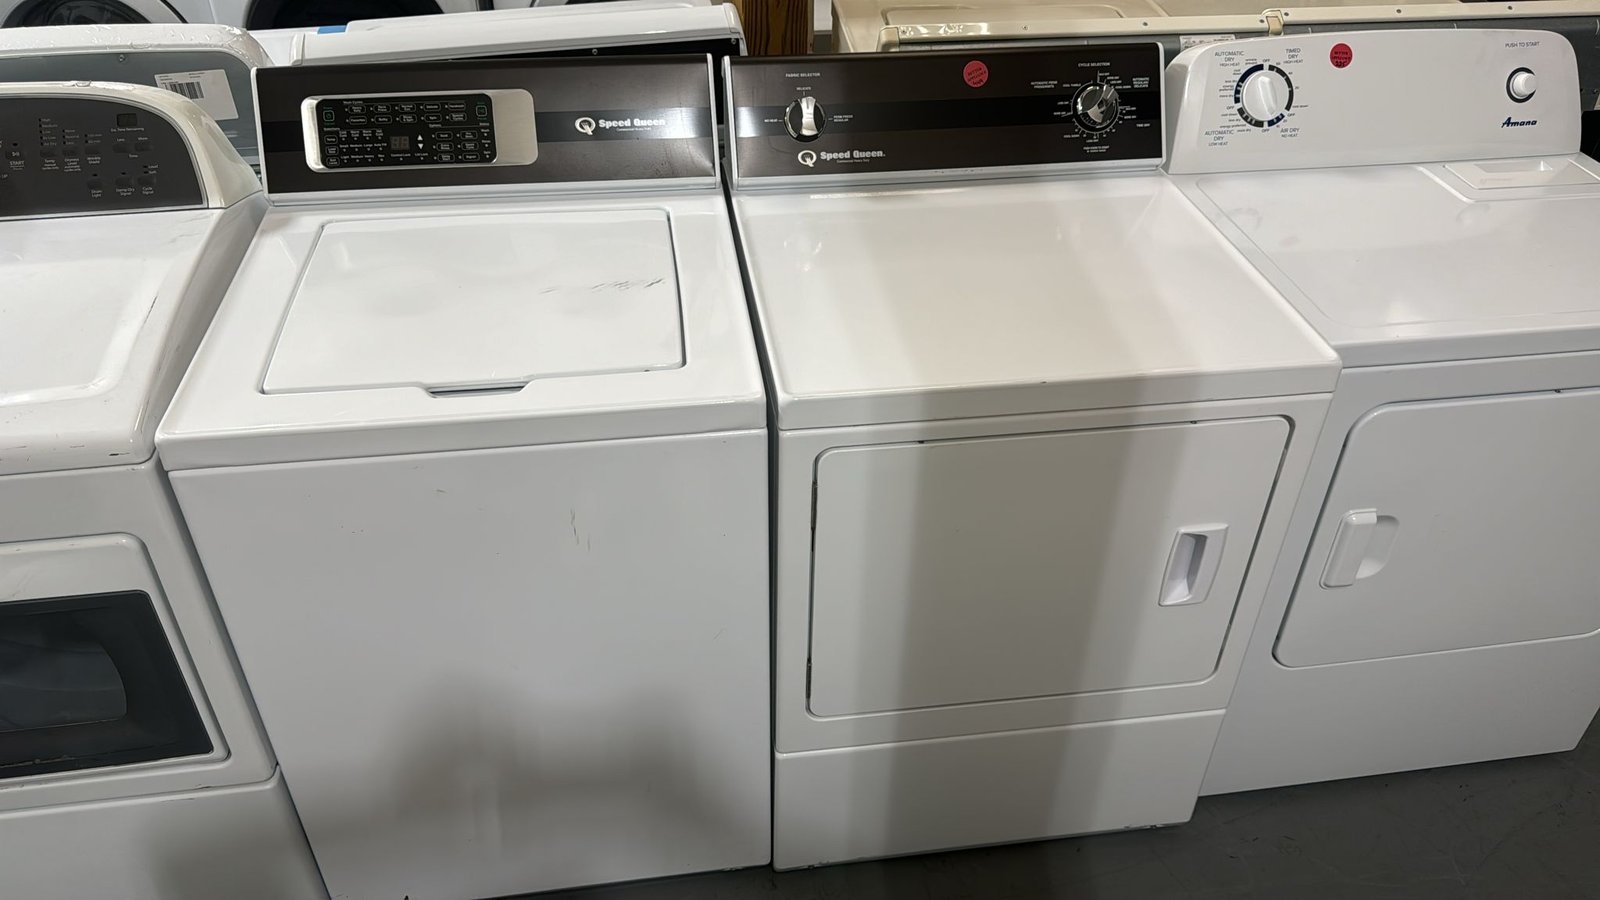 Speed Queen Like New Washer Dryer Set – White